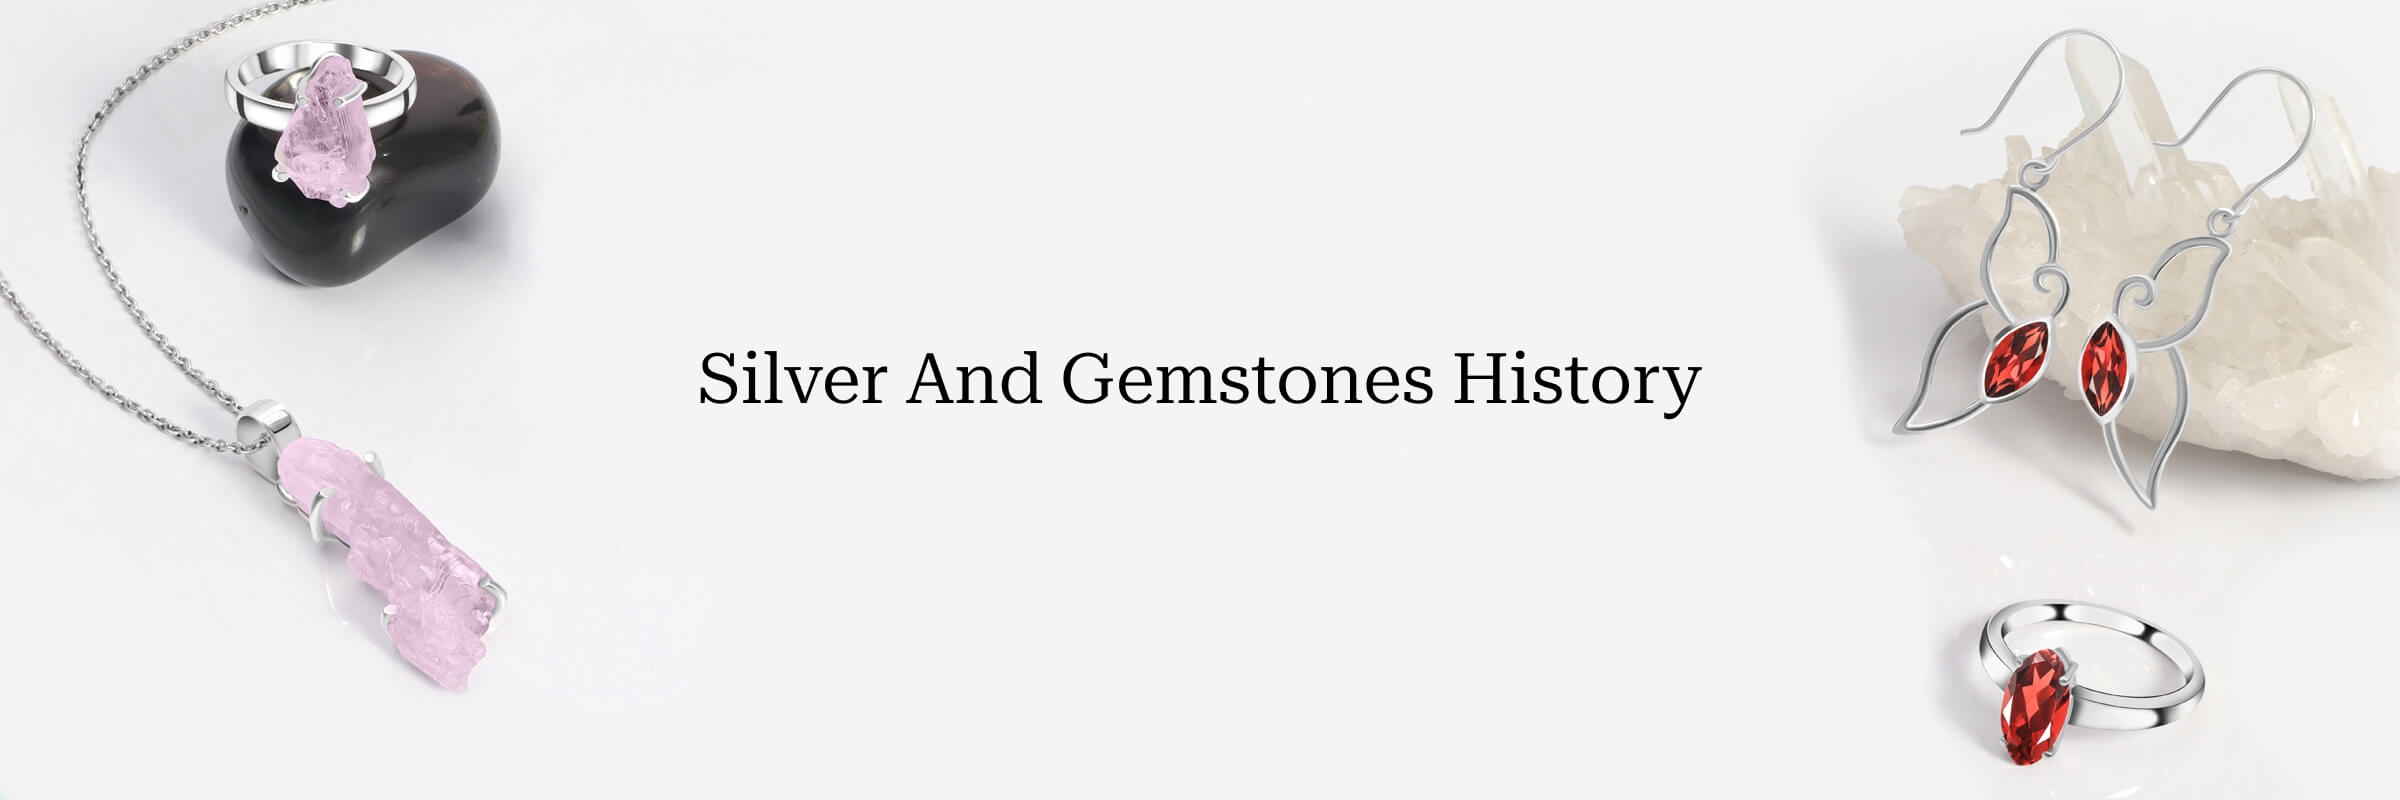 History Of Silver And Gemstones